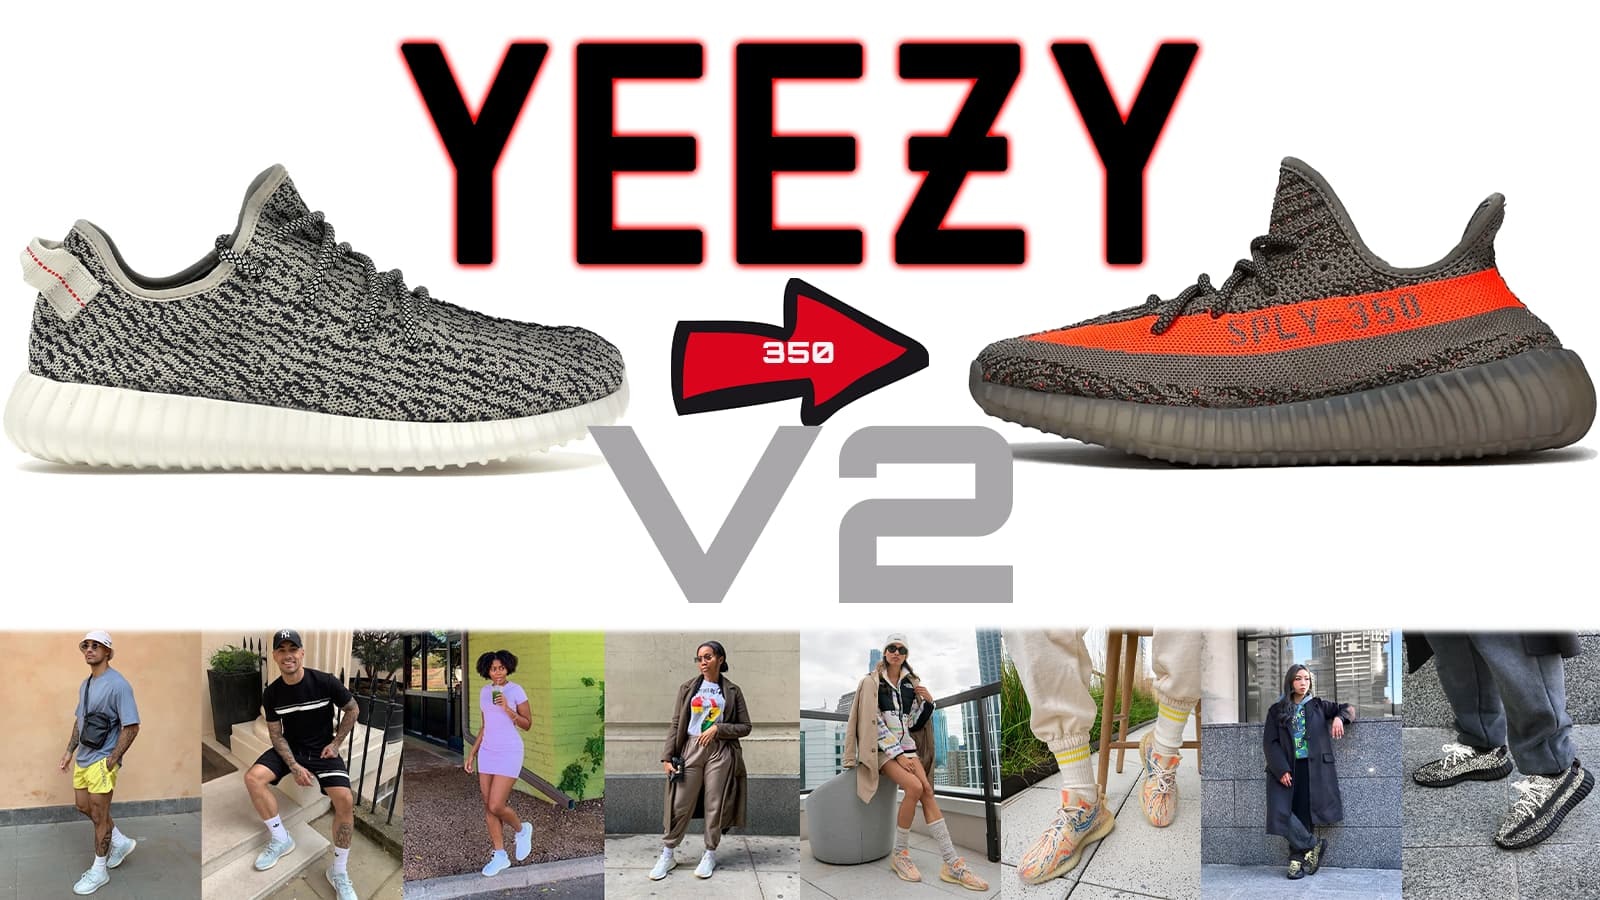 adidas YEEZY Boost 350 V2 Review